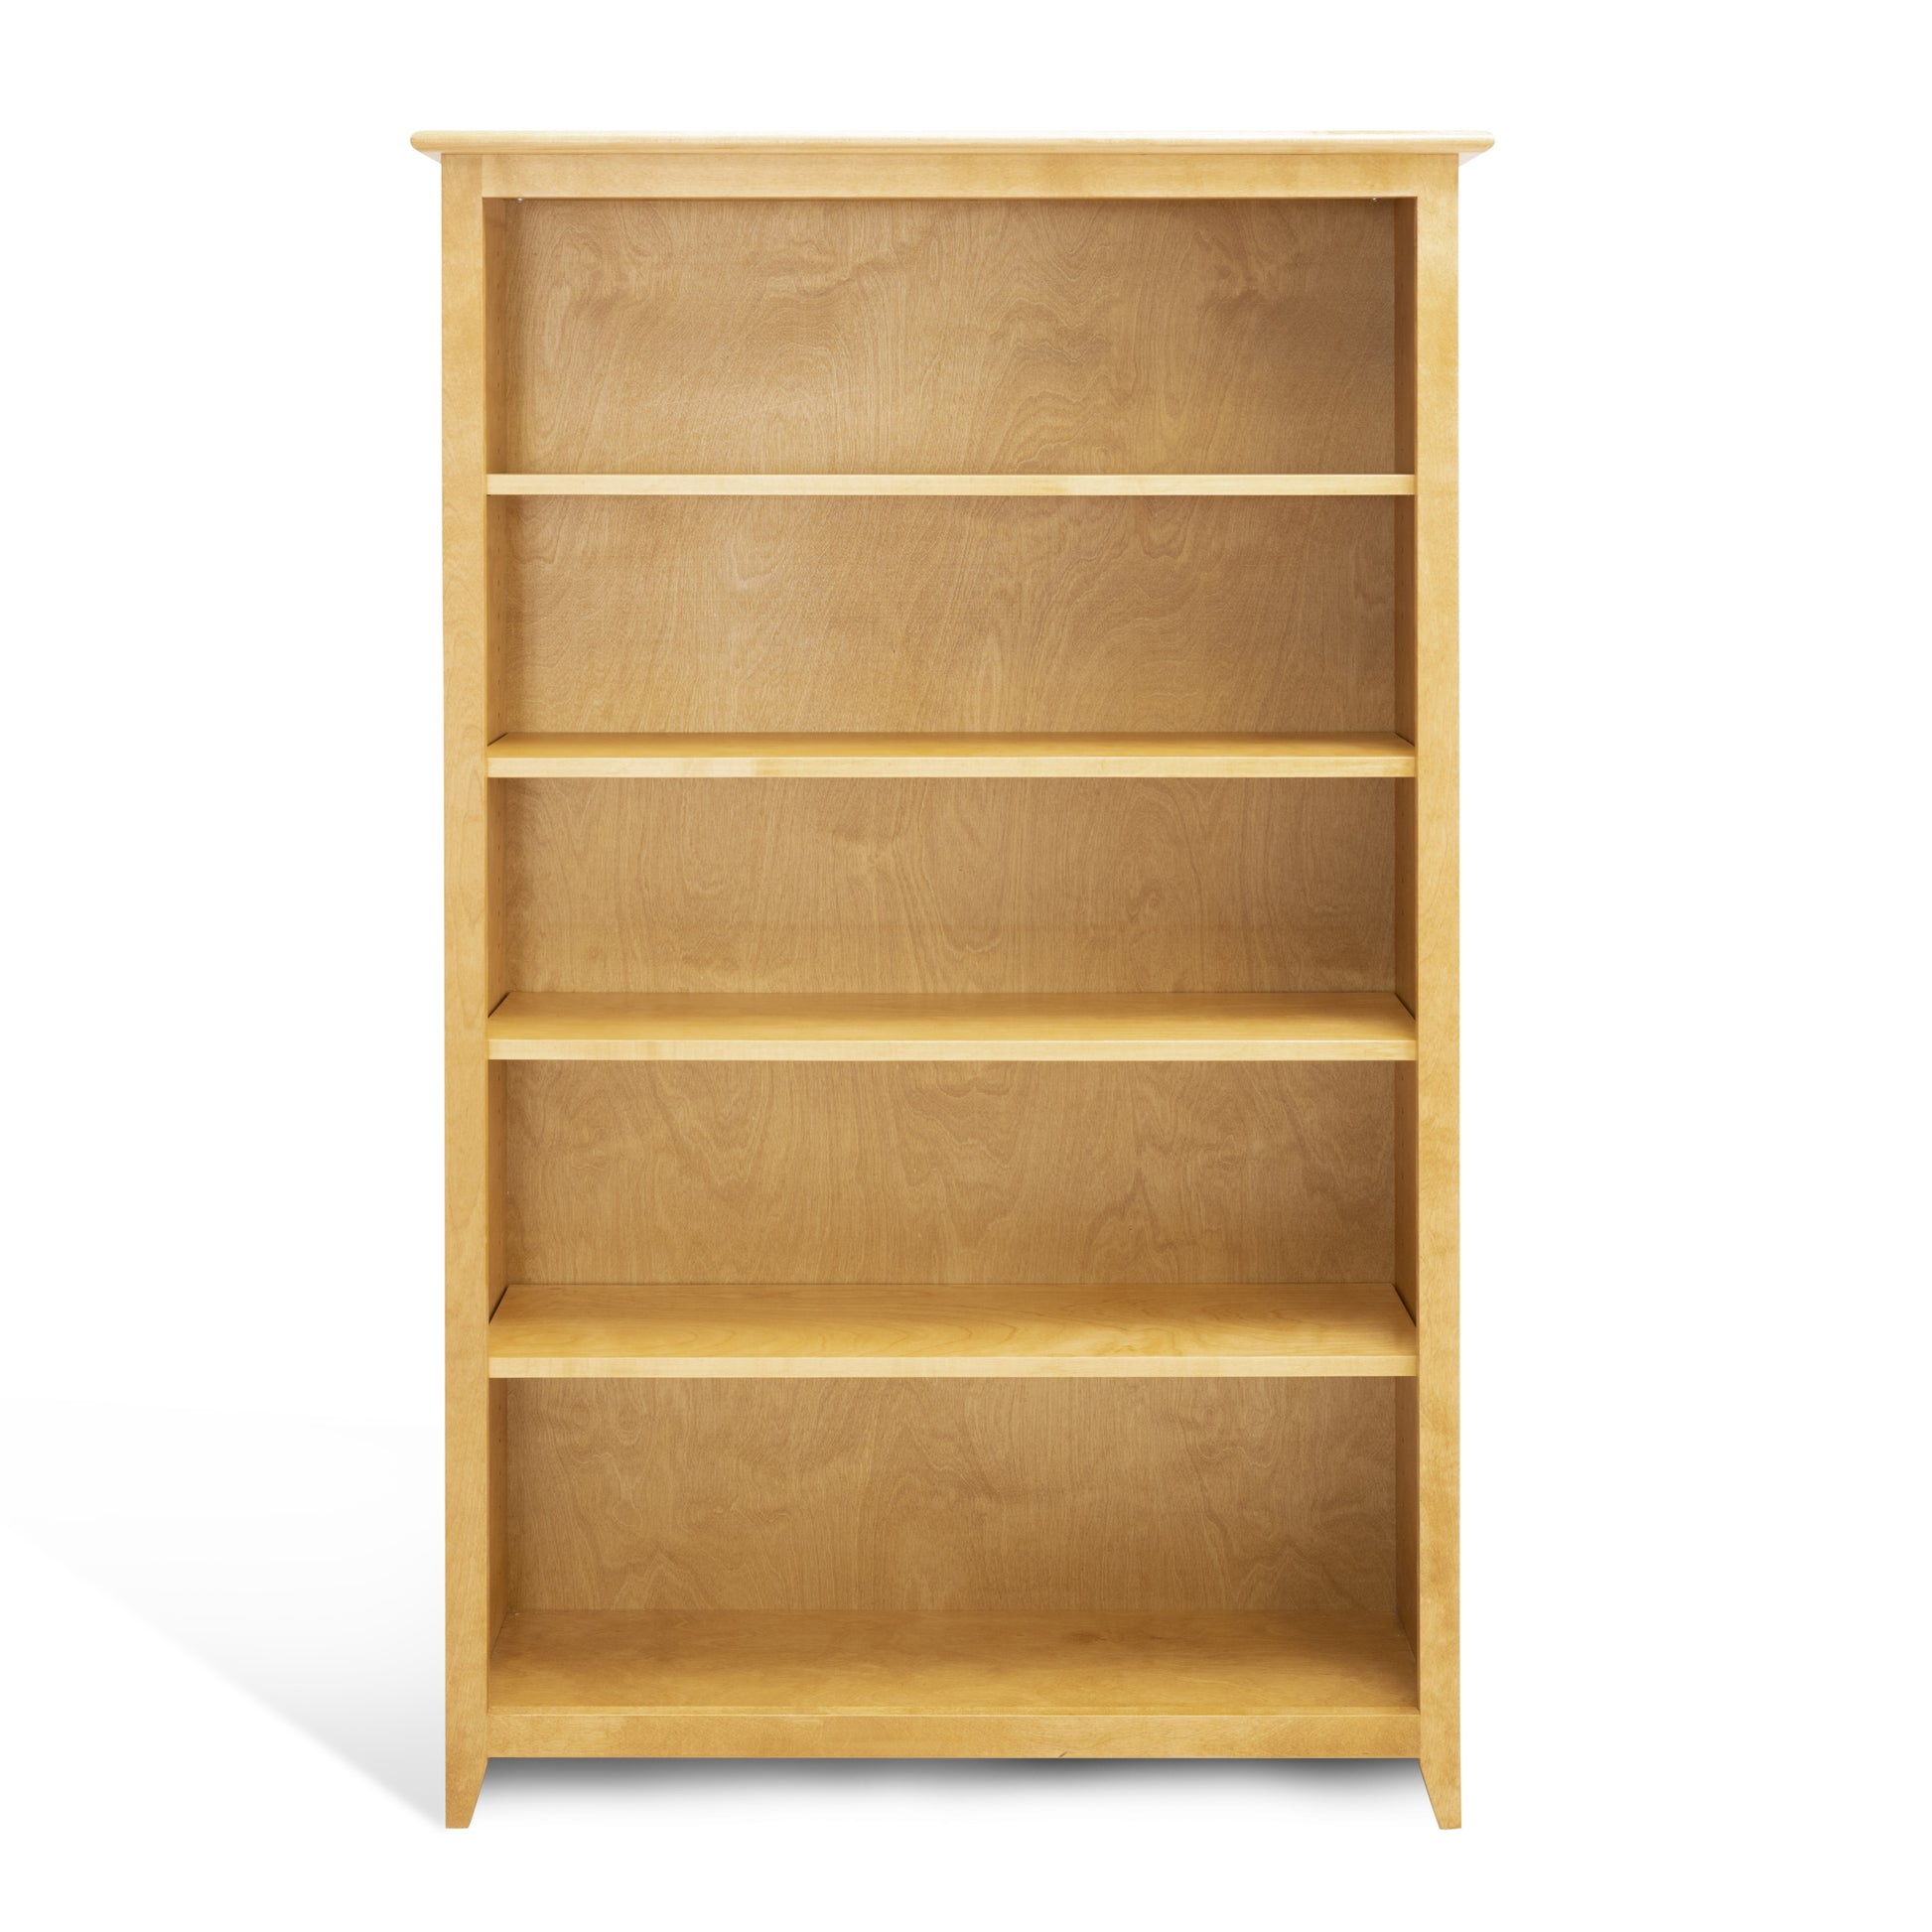 Acadia Shaker Bookcase built with birch featuring shelves that are adjustable. Shown in Autumn Gold finish.